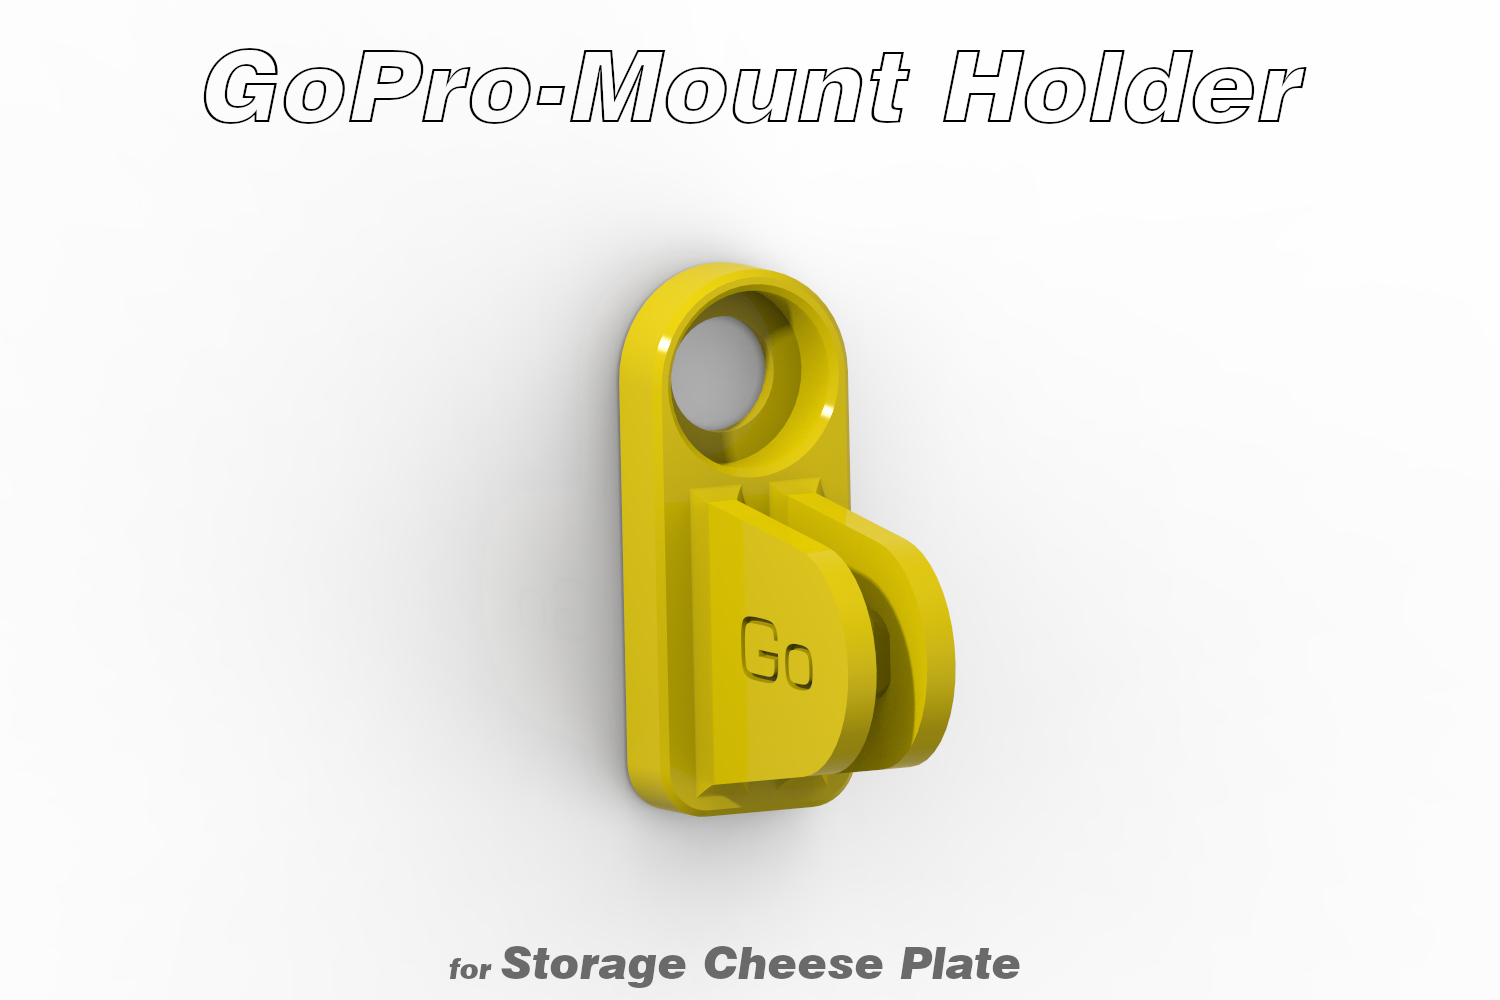 GoPro-Mount Holder (for Storage Cheese Plate)